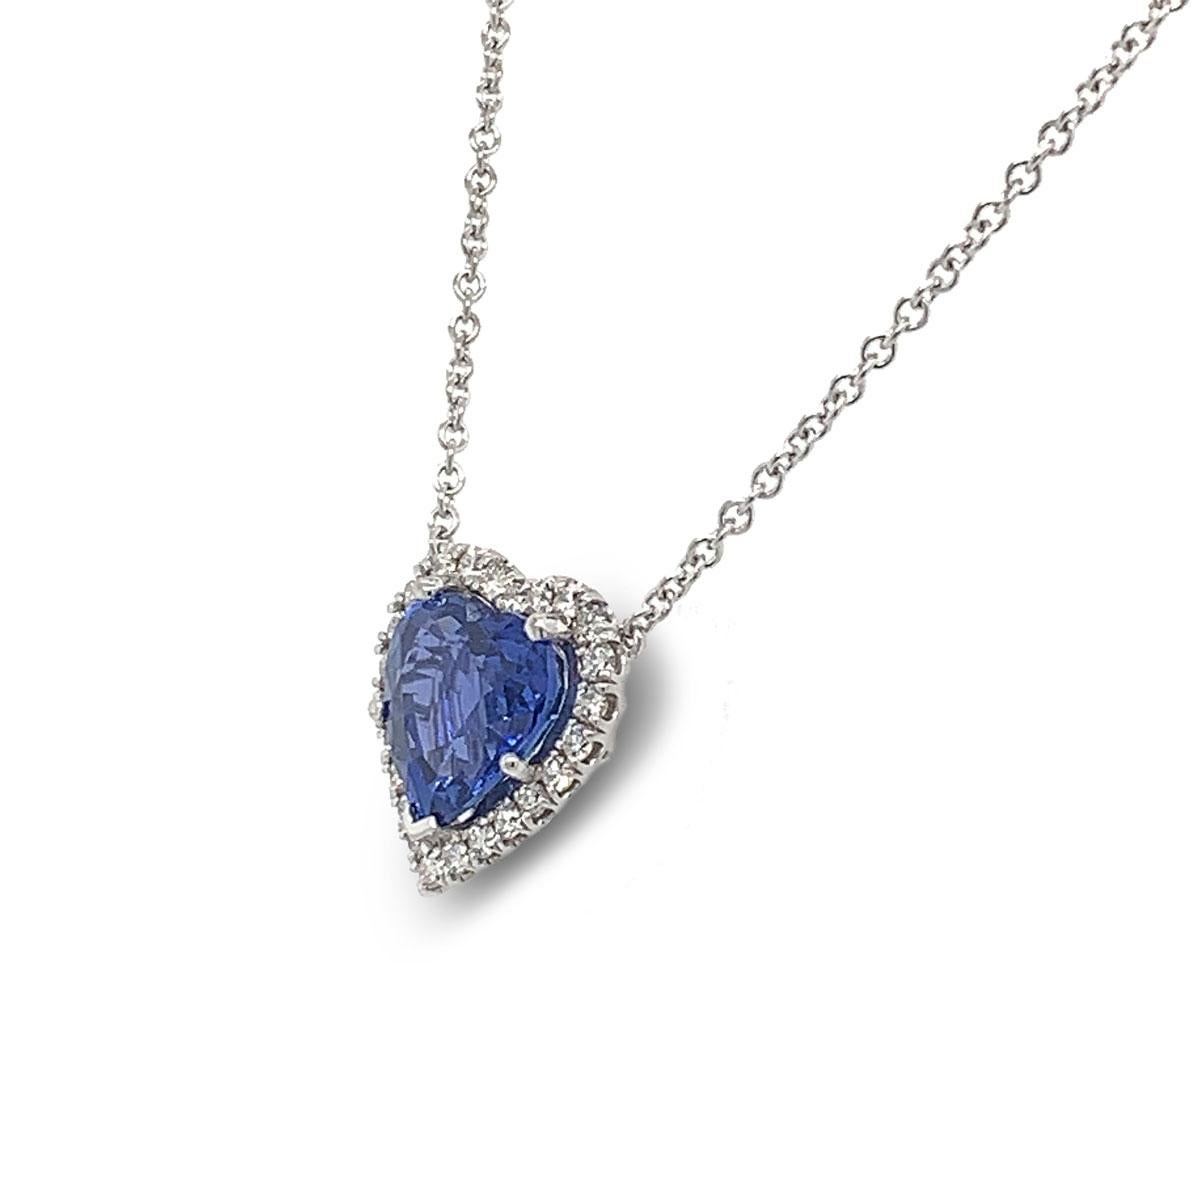 These extraordinary hand crafted 18k white gold pendant features preminum quality 5.10 Carat Heart Shape Blue Sapphire GIA certified,  framed in a halo of 0.40 carat total weight of brilliant diamonds. This pendant is ideal for special occasions.